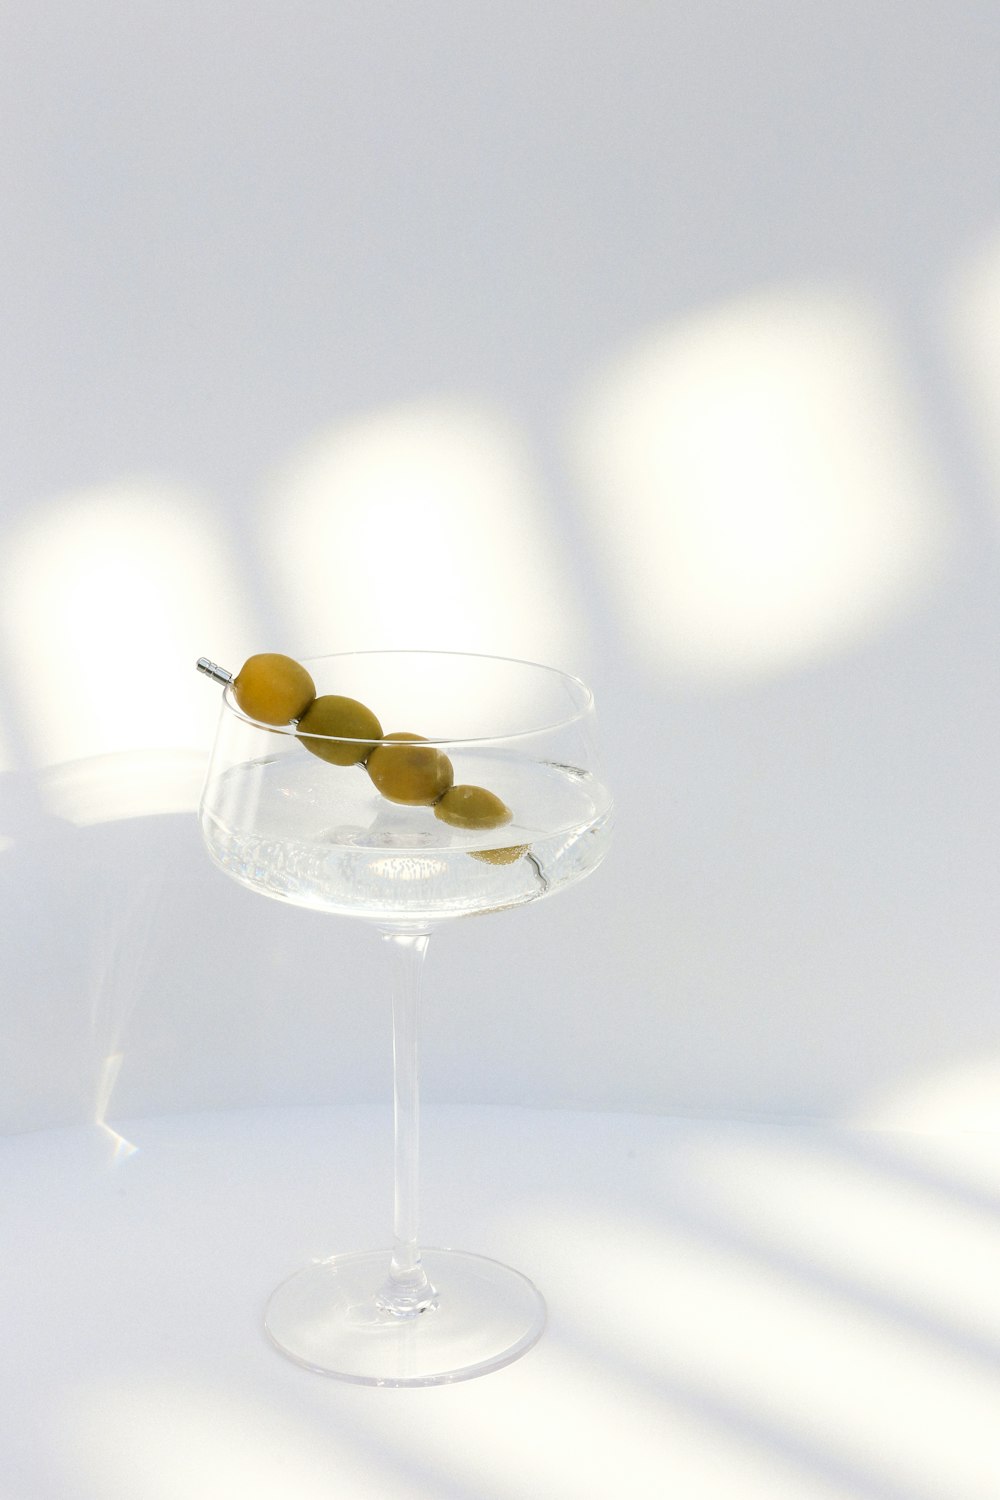 gold round coins on clear glass bowl